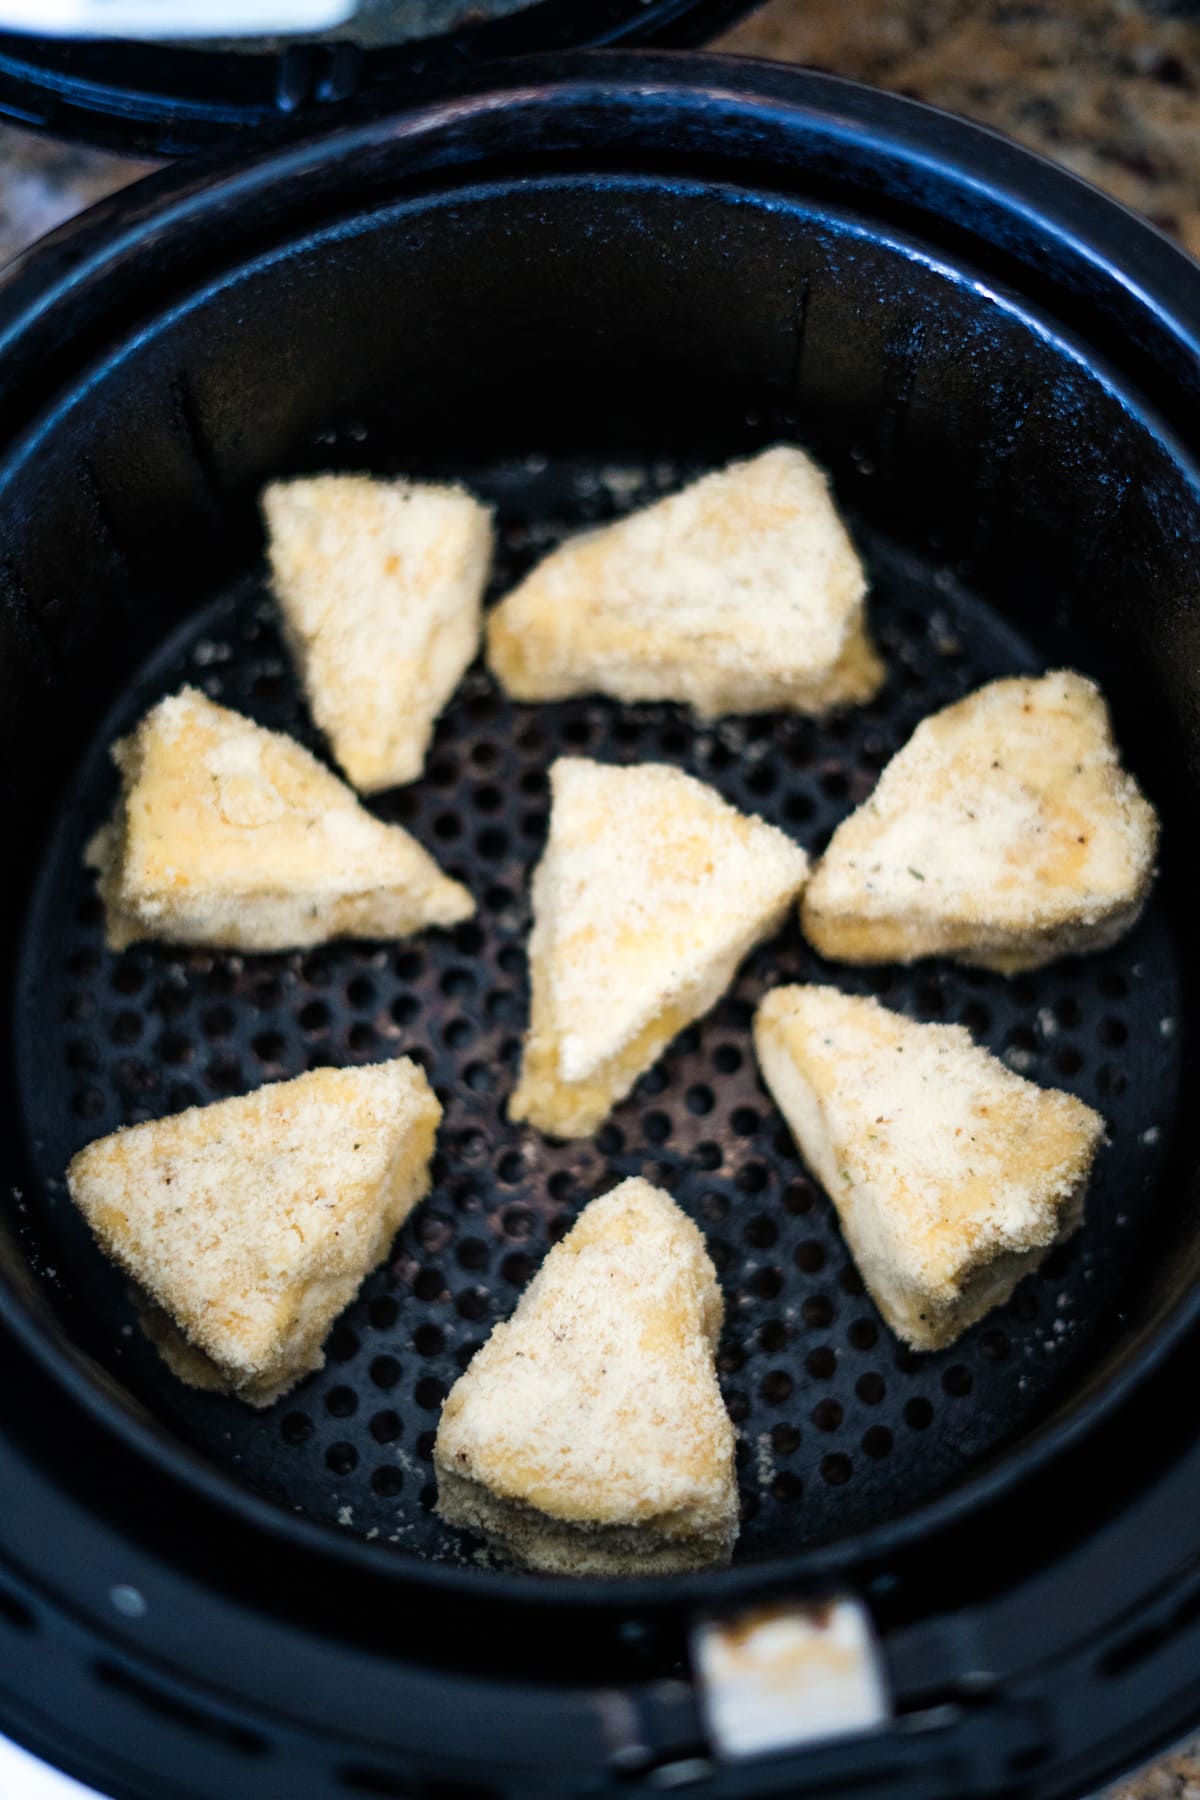 A group of biscuits in an air fryer.